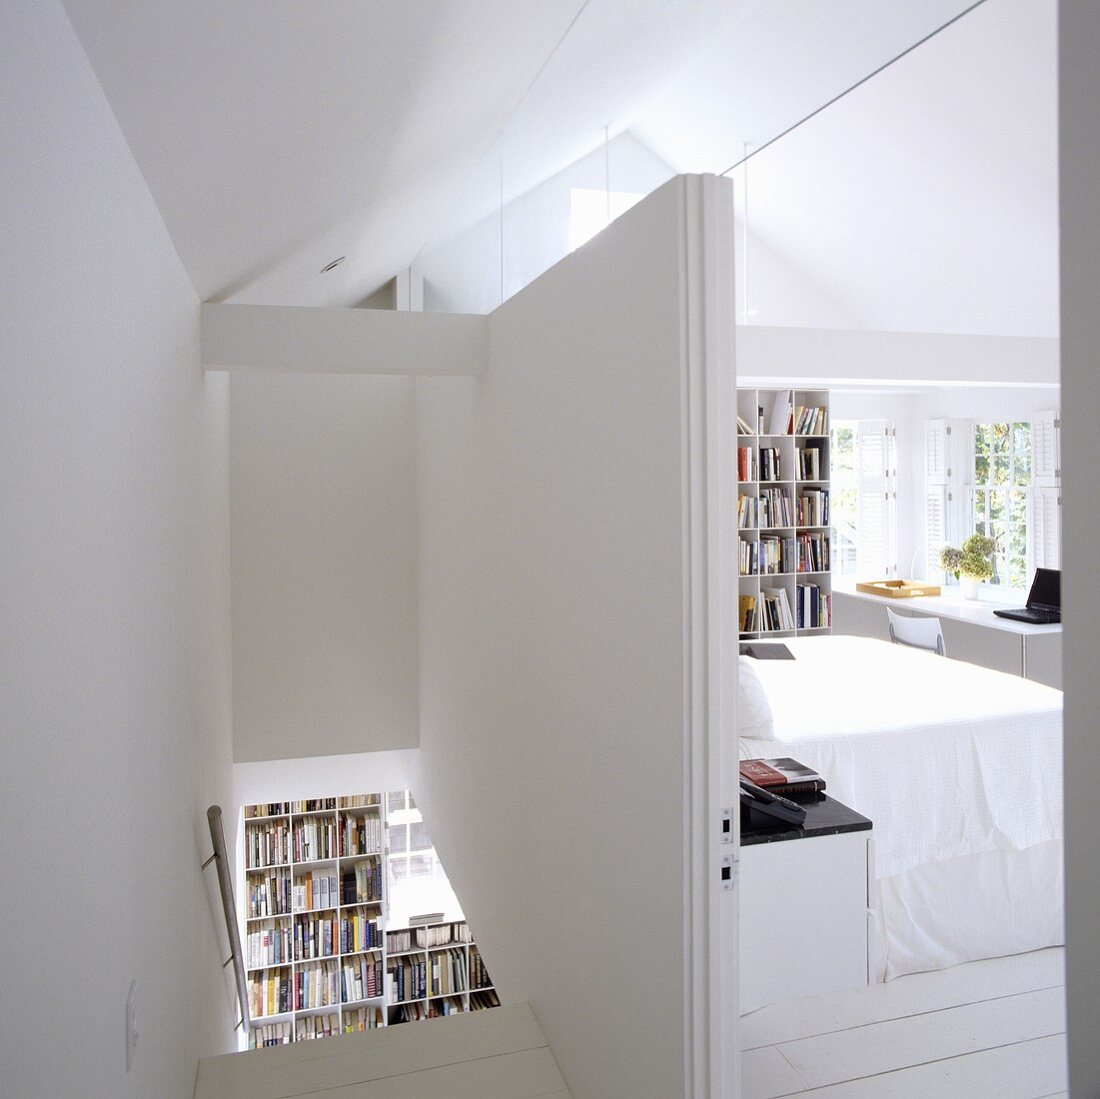 A partitioned attic room with a white stairway and a view into a bedroom